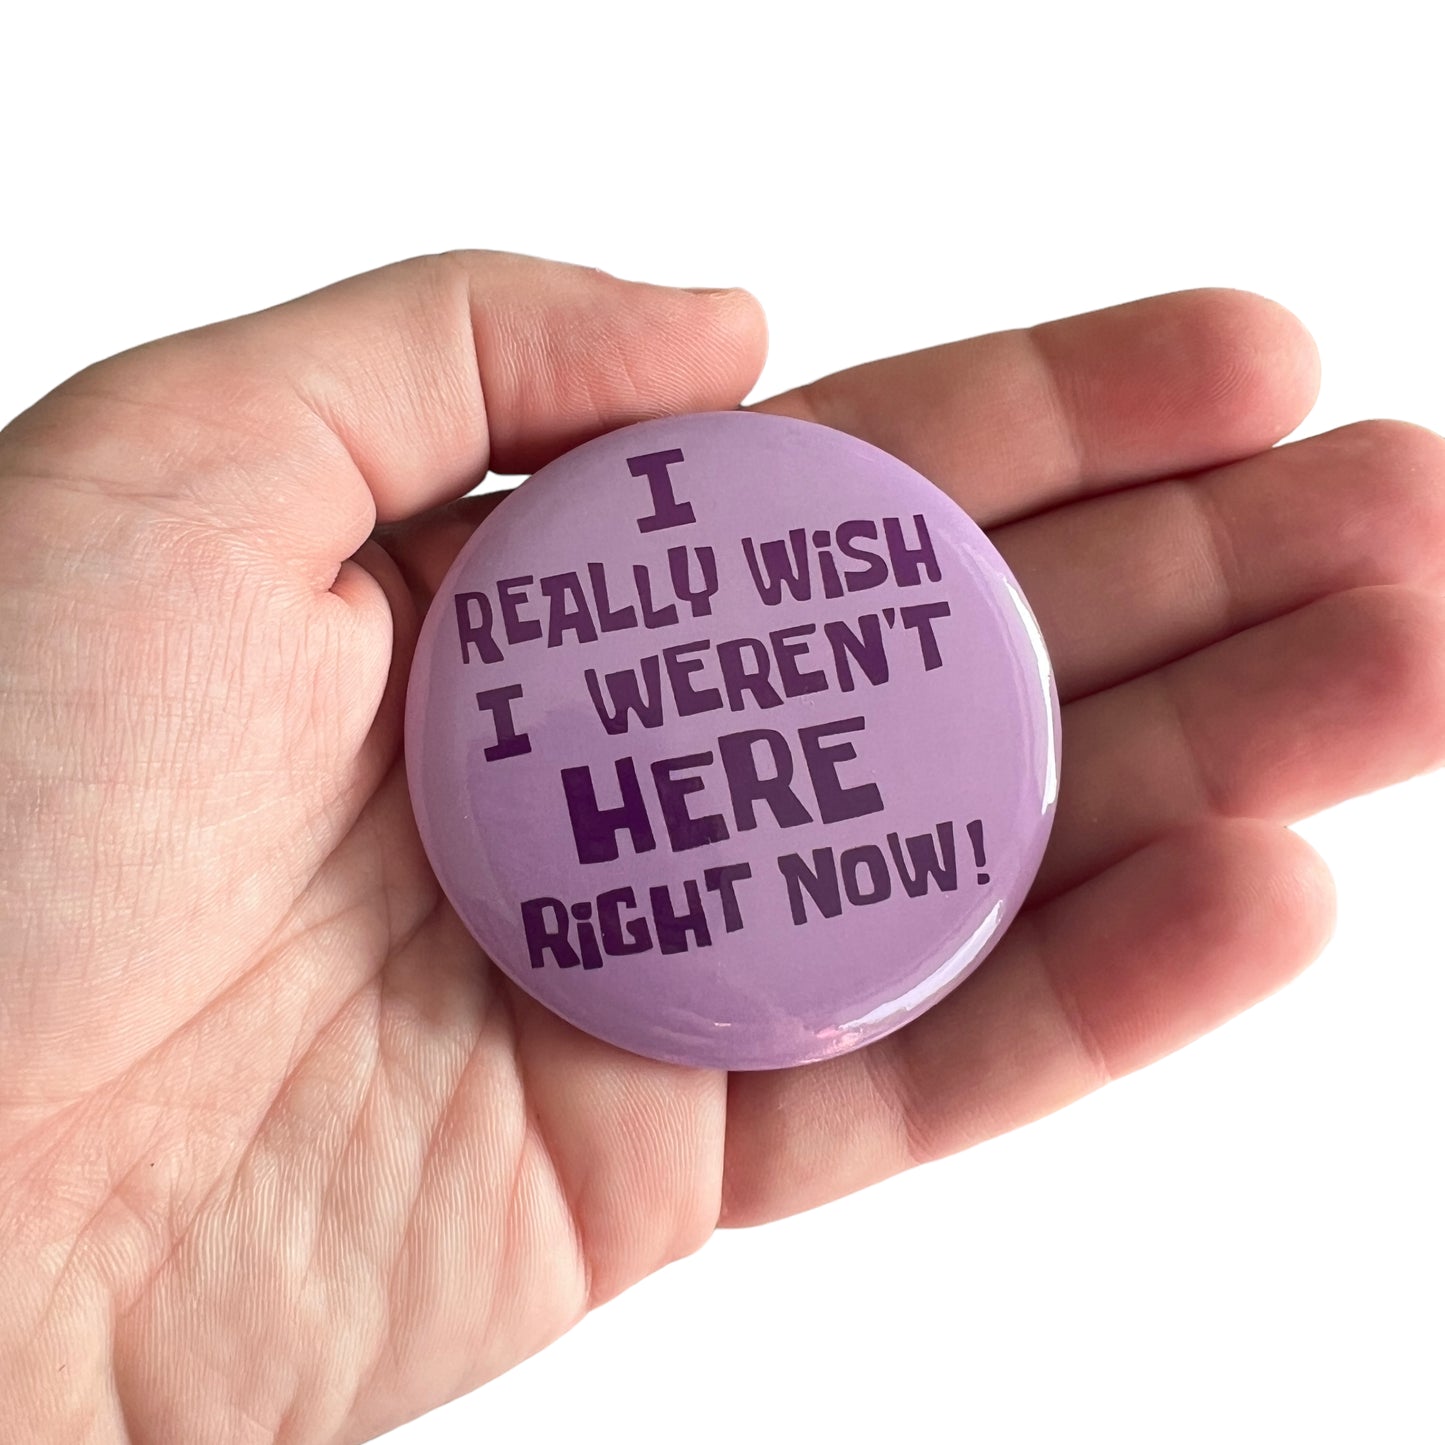 Pin — ‘I really wish I weren’t here right now.’